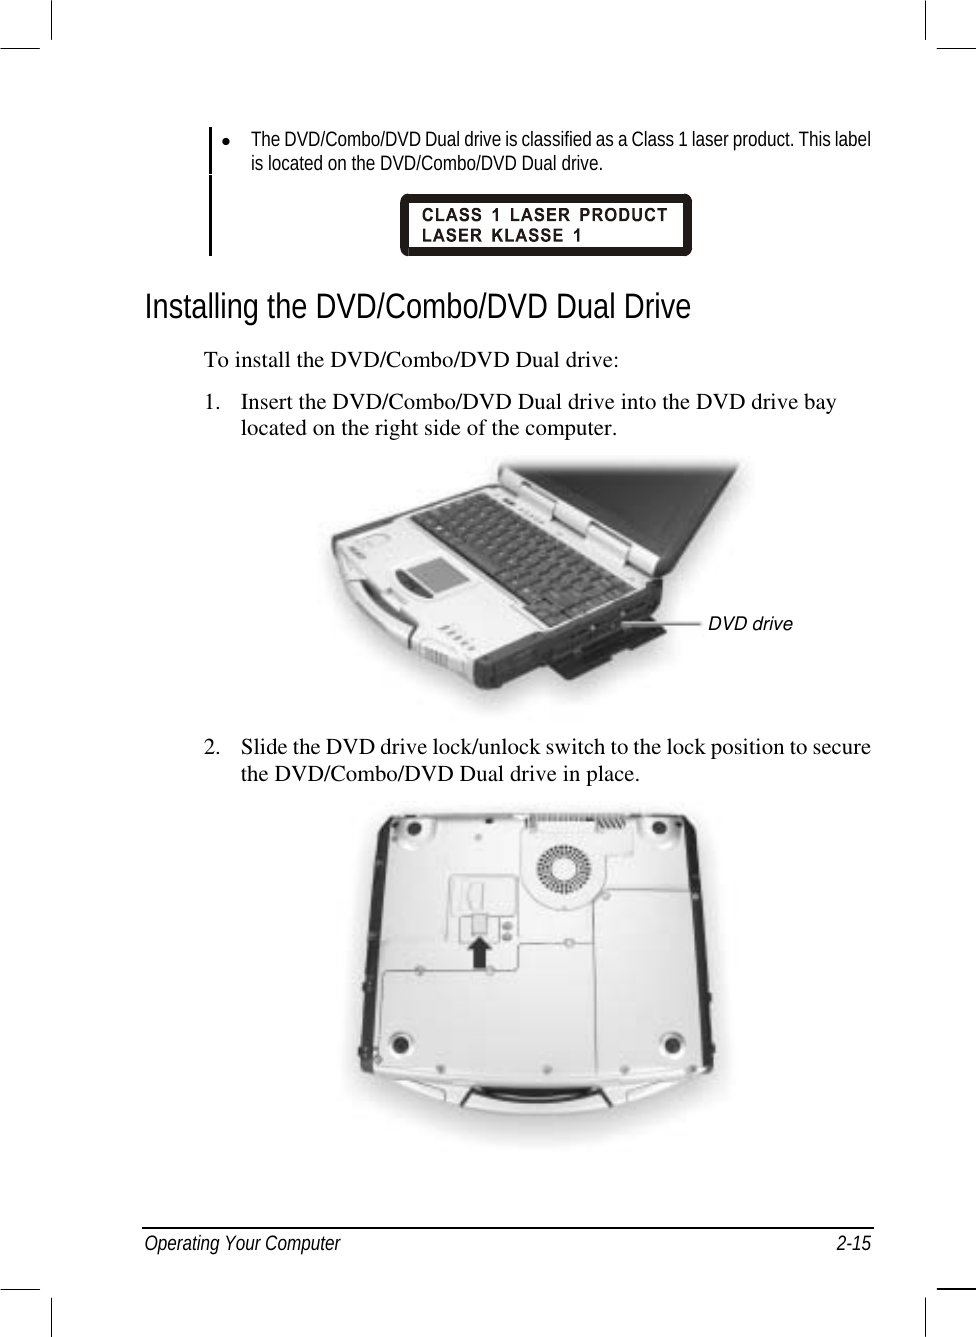  Operating Your Computer  2-15   The DVD/Combo/DVD Dual drive is classified as a Class 1 laser product. This label is located on the DVD/Combo/DVD Dual drive.   Installing the DVD/Combo/DVD Dual Drive To install the DVD/Combo/DVD Dual drive: 1.  Insert the DVD/Combo/DVD Dual drive into the DVD drive bay located on the right side of the computer.  2.  Slide the DVD drive lock/unlock switch to the lock position to secure the DVD/Combo/DVD Dual drive in place.  DVD drive 